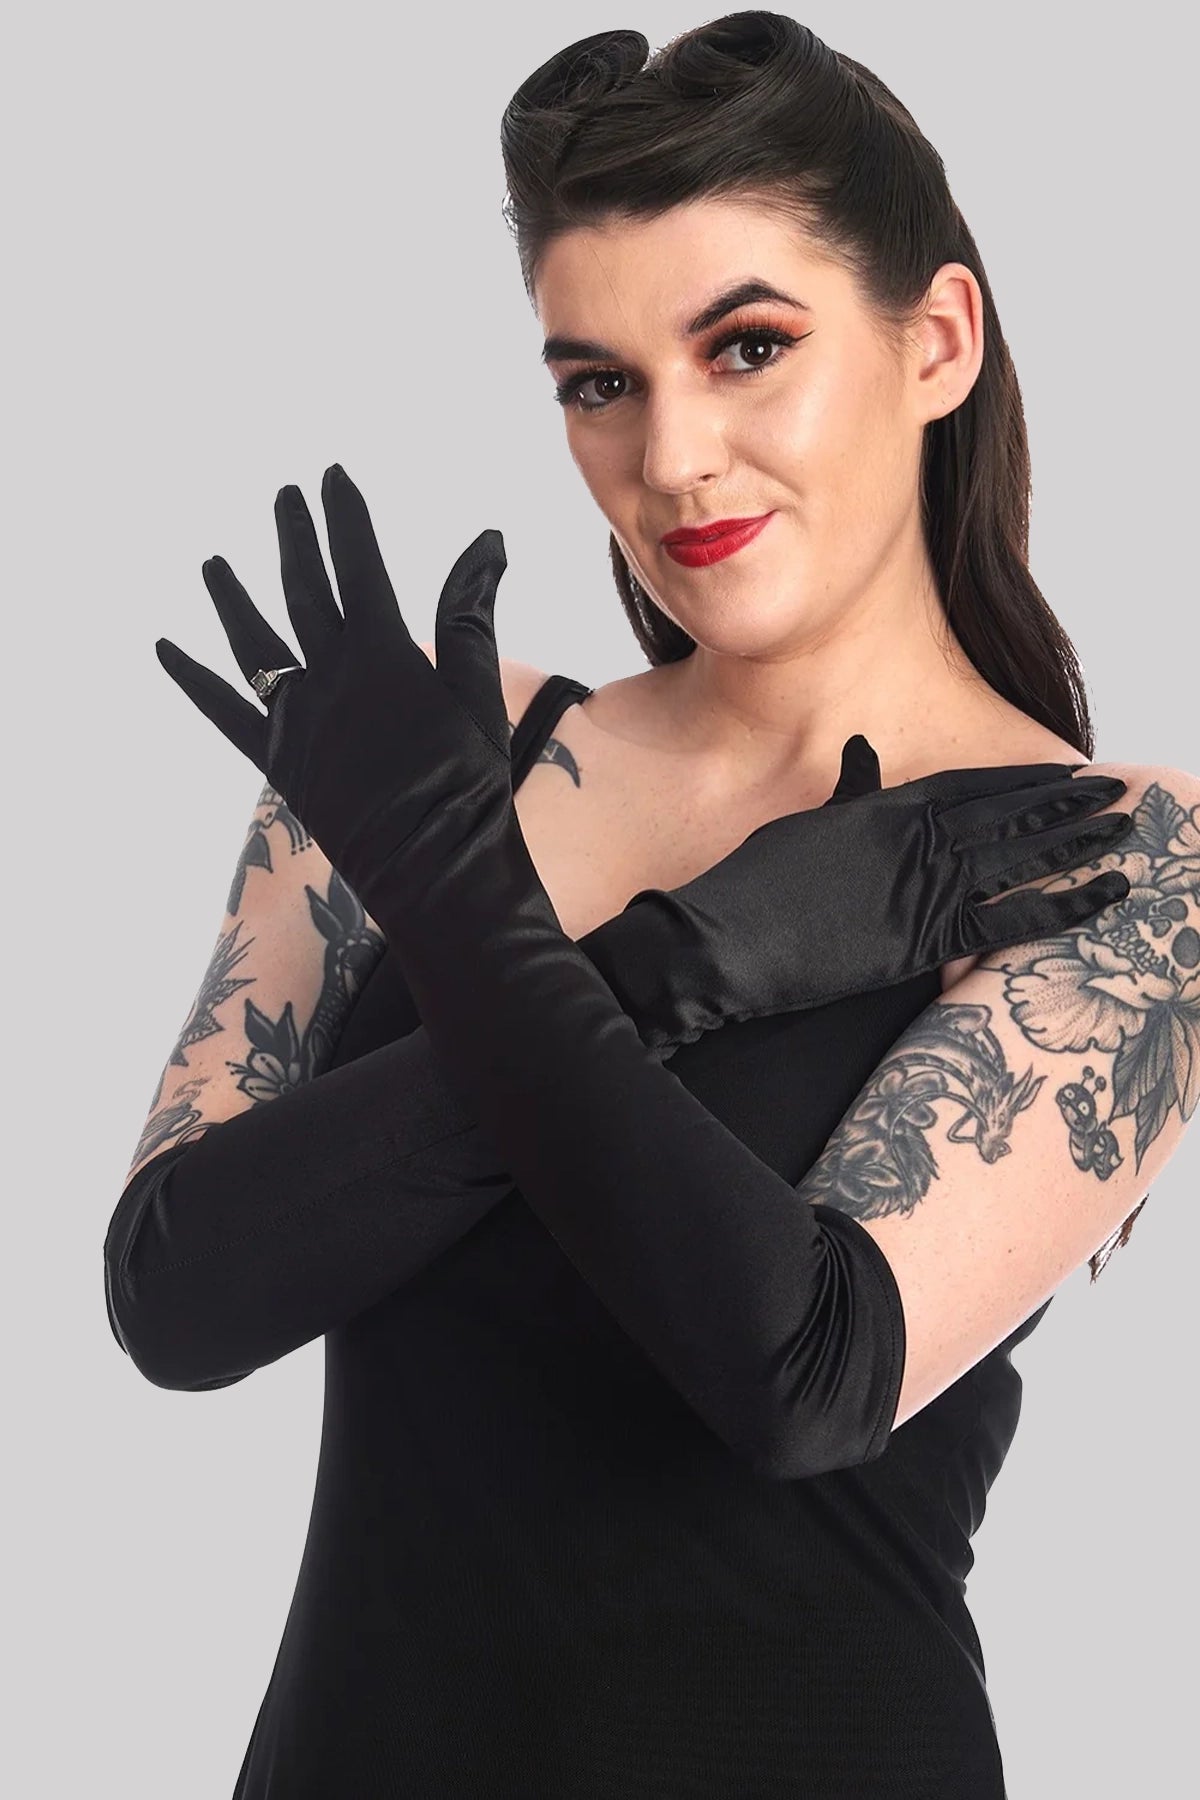 Banned Allegra Satinated Opera Elbow Length Gloves,Black,One Size